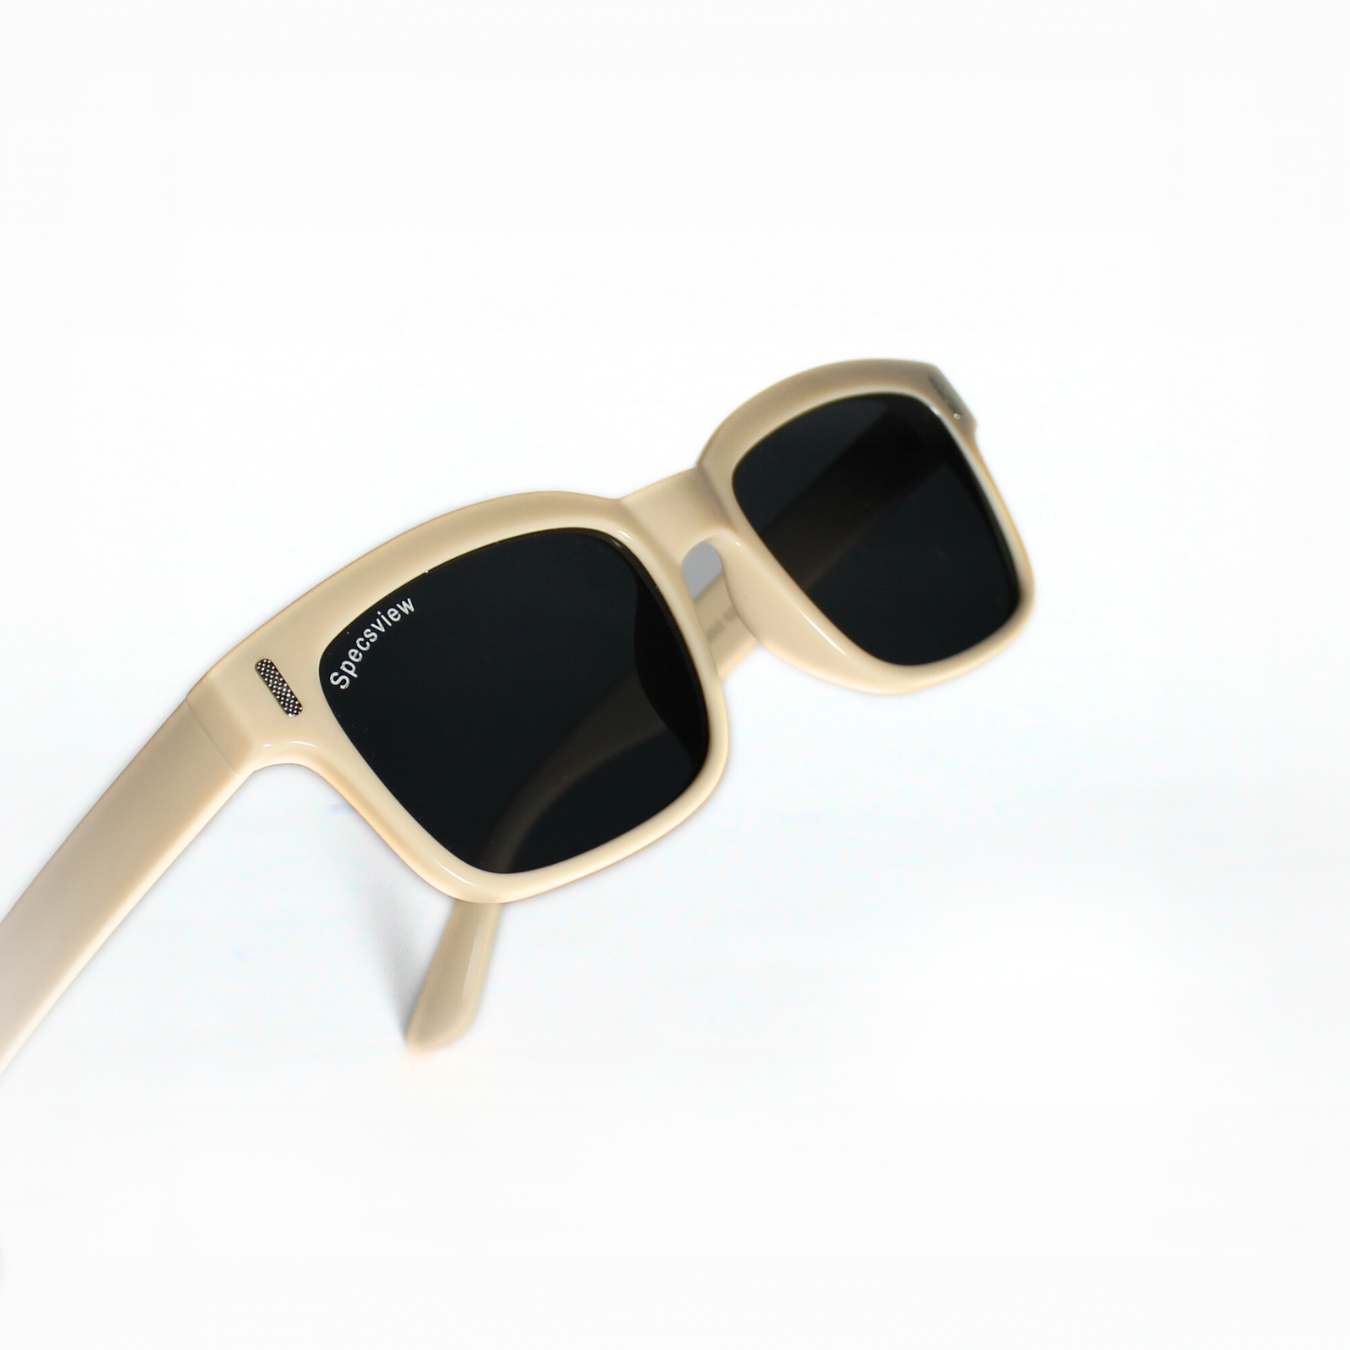 SPECTRE//005 I Sunglasses for Men and Women - Specsview